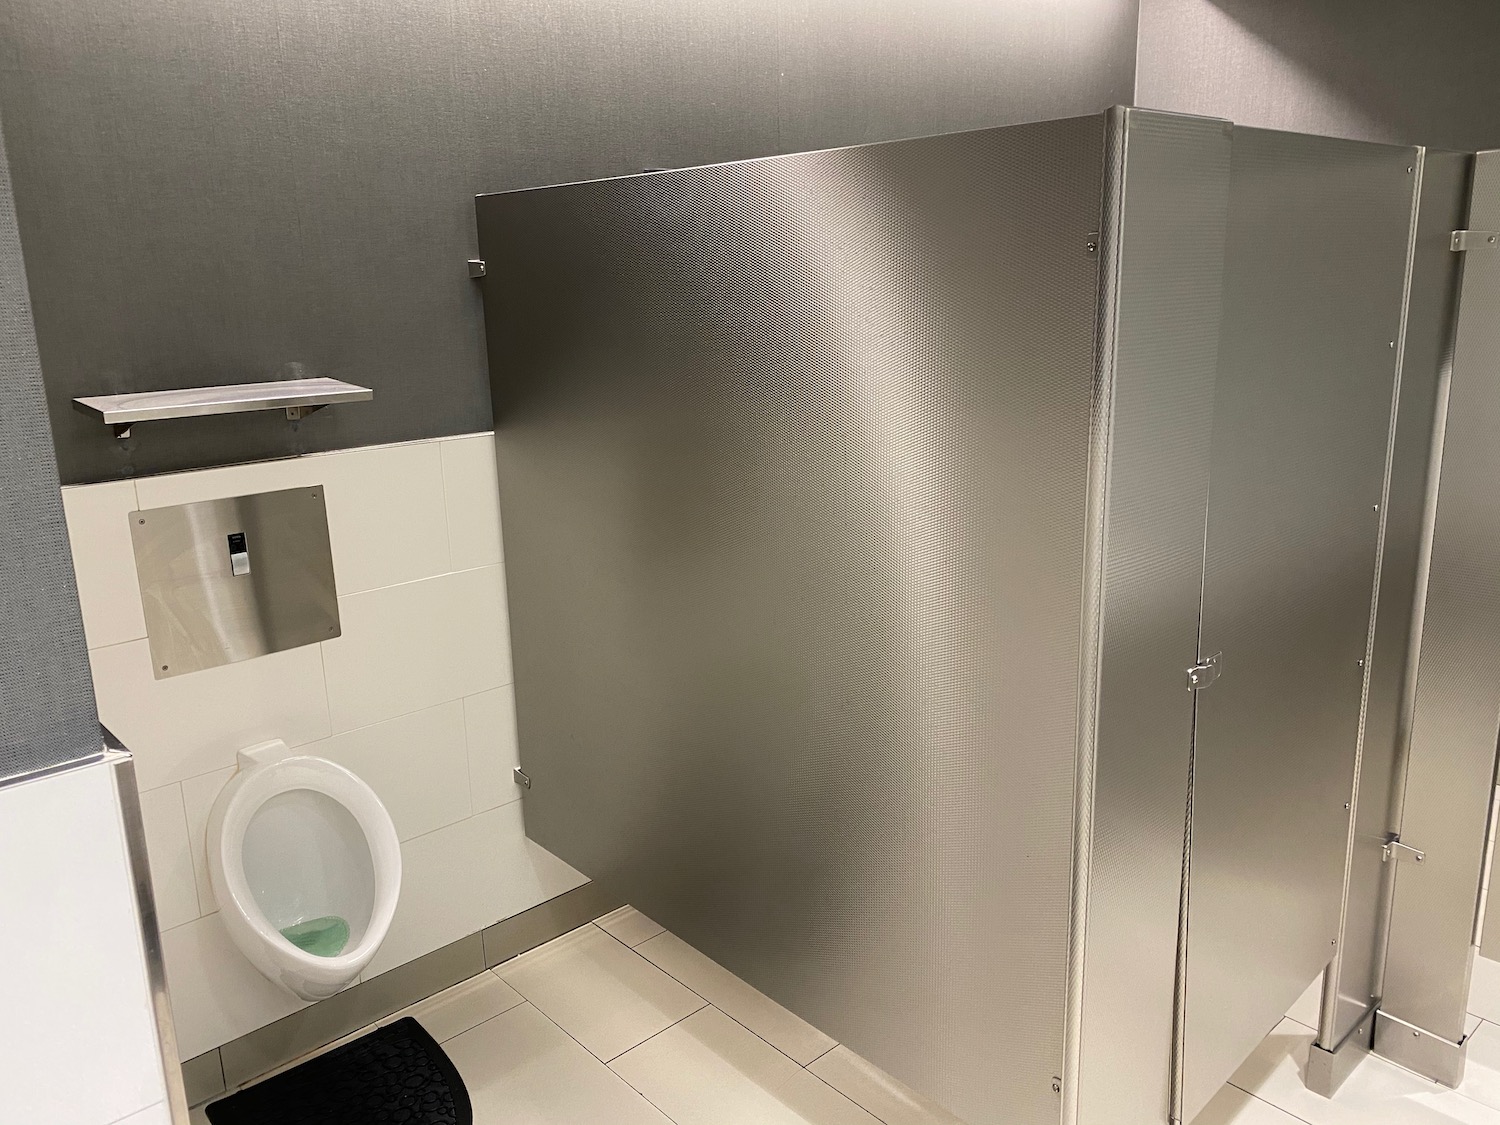 a bathroom with a silver stall